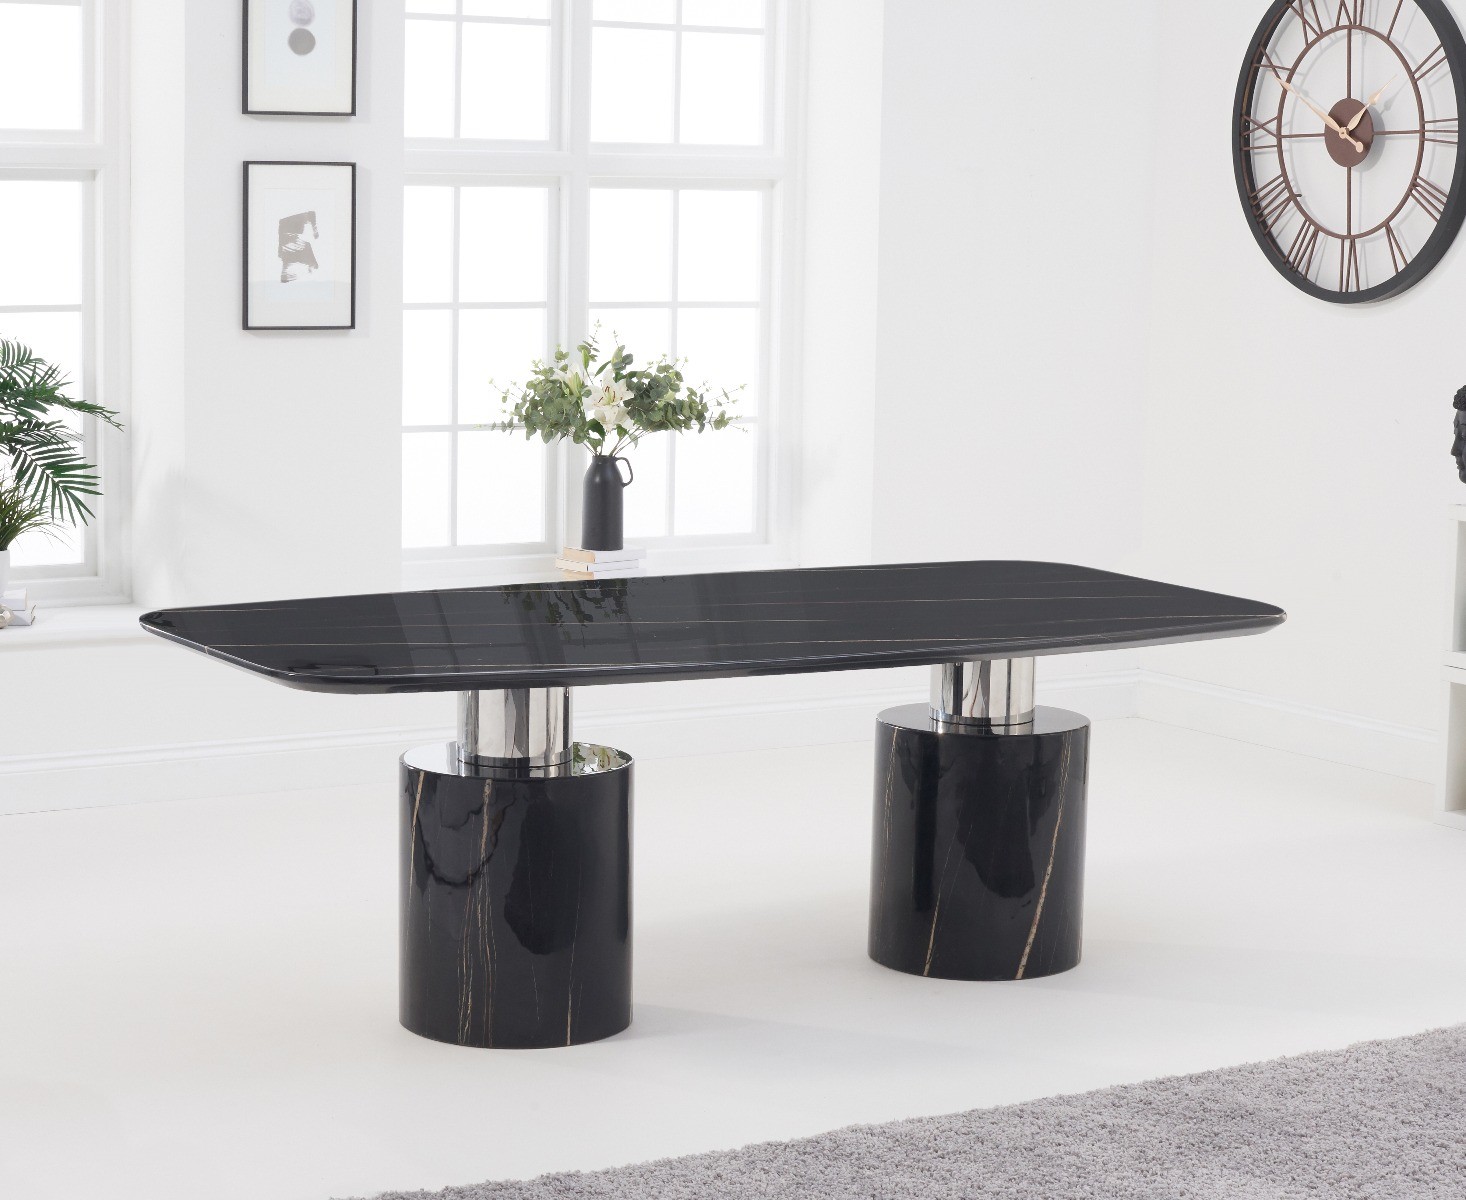 Photo 2 of Antonio 220cm black marble dining table with 10 grey francesca chairs